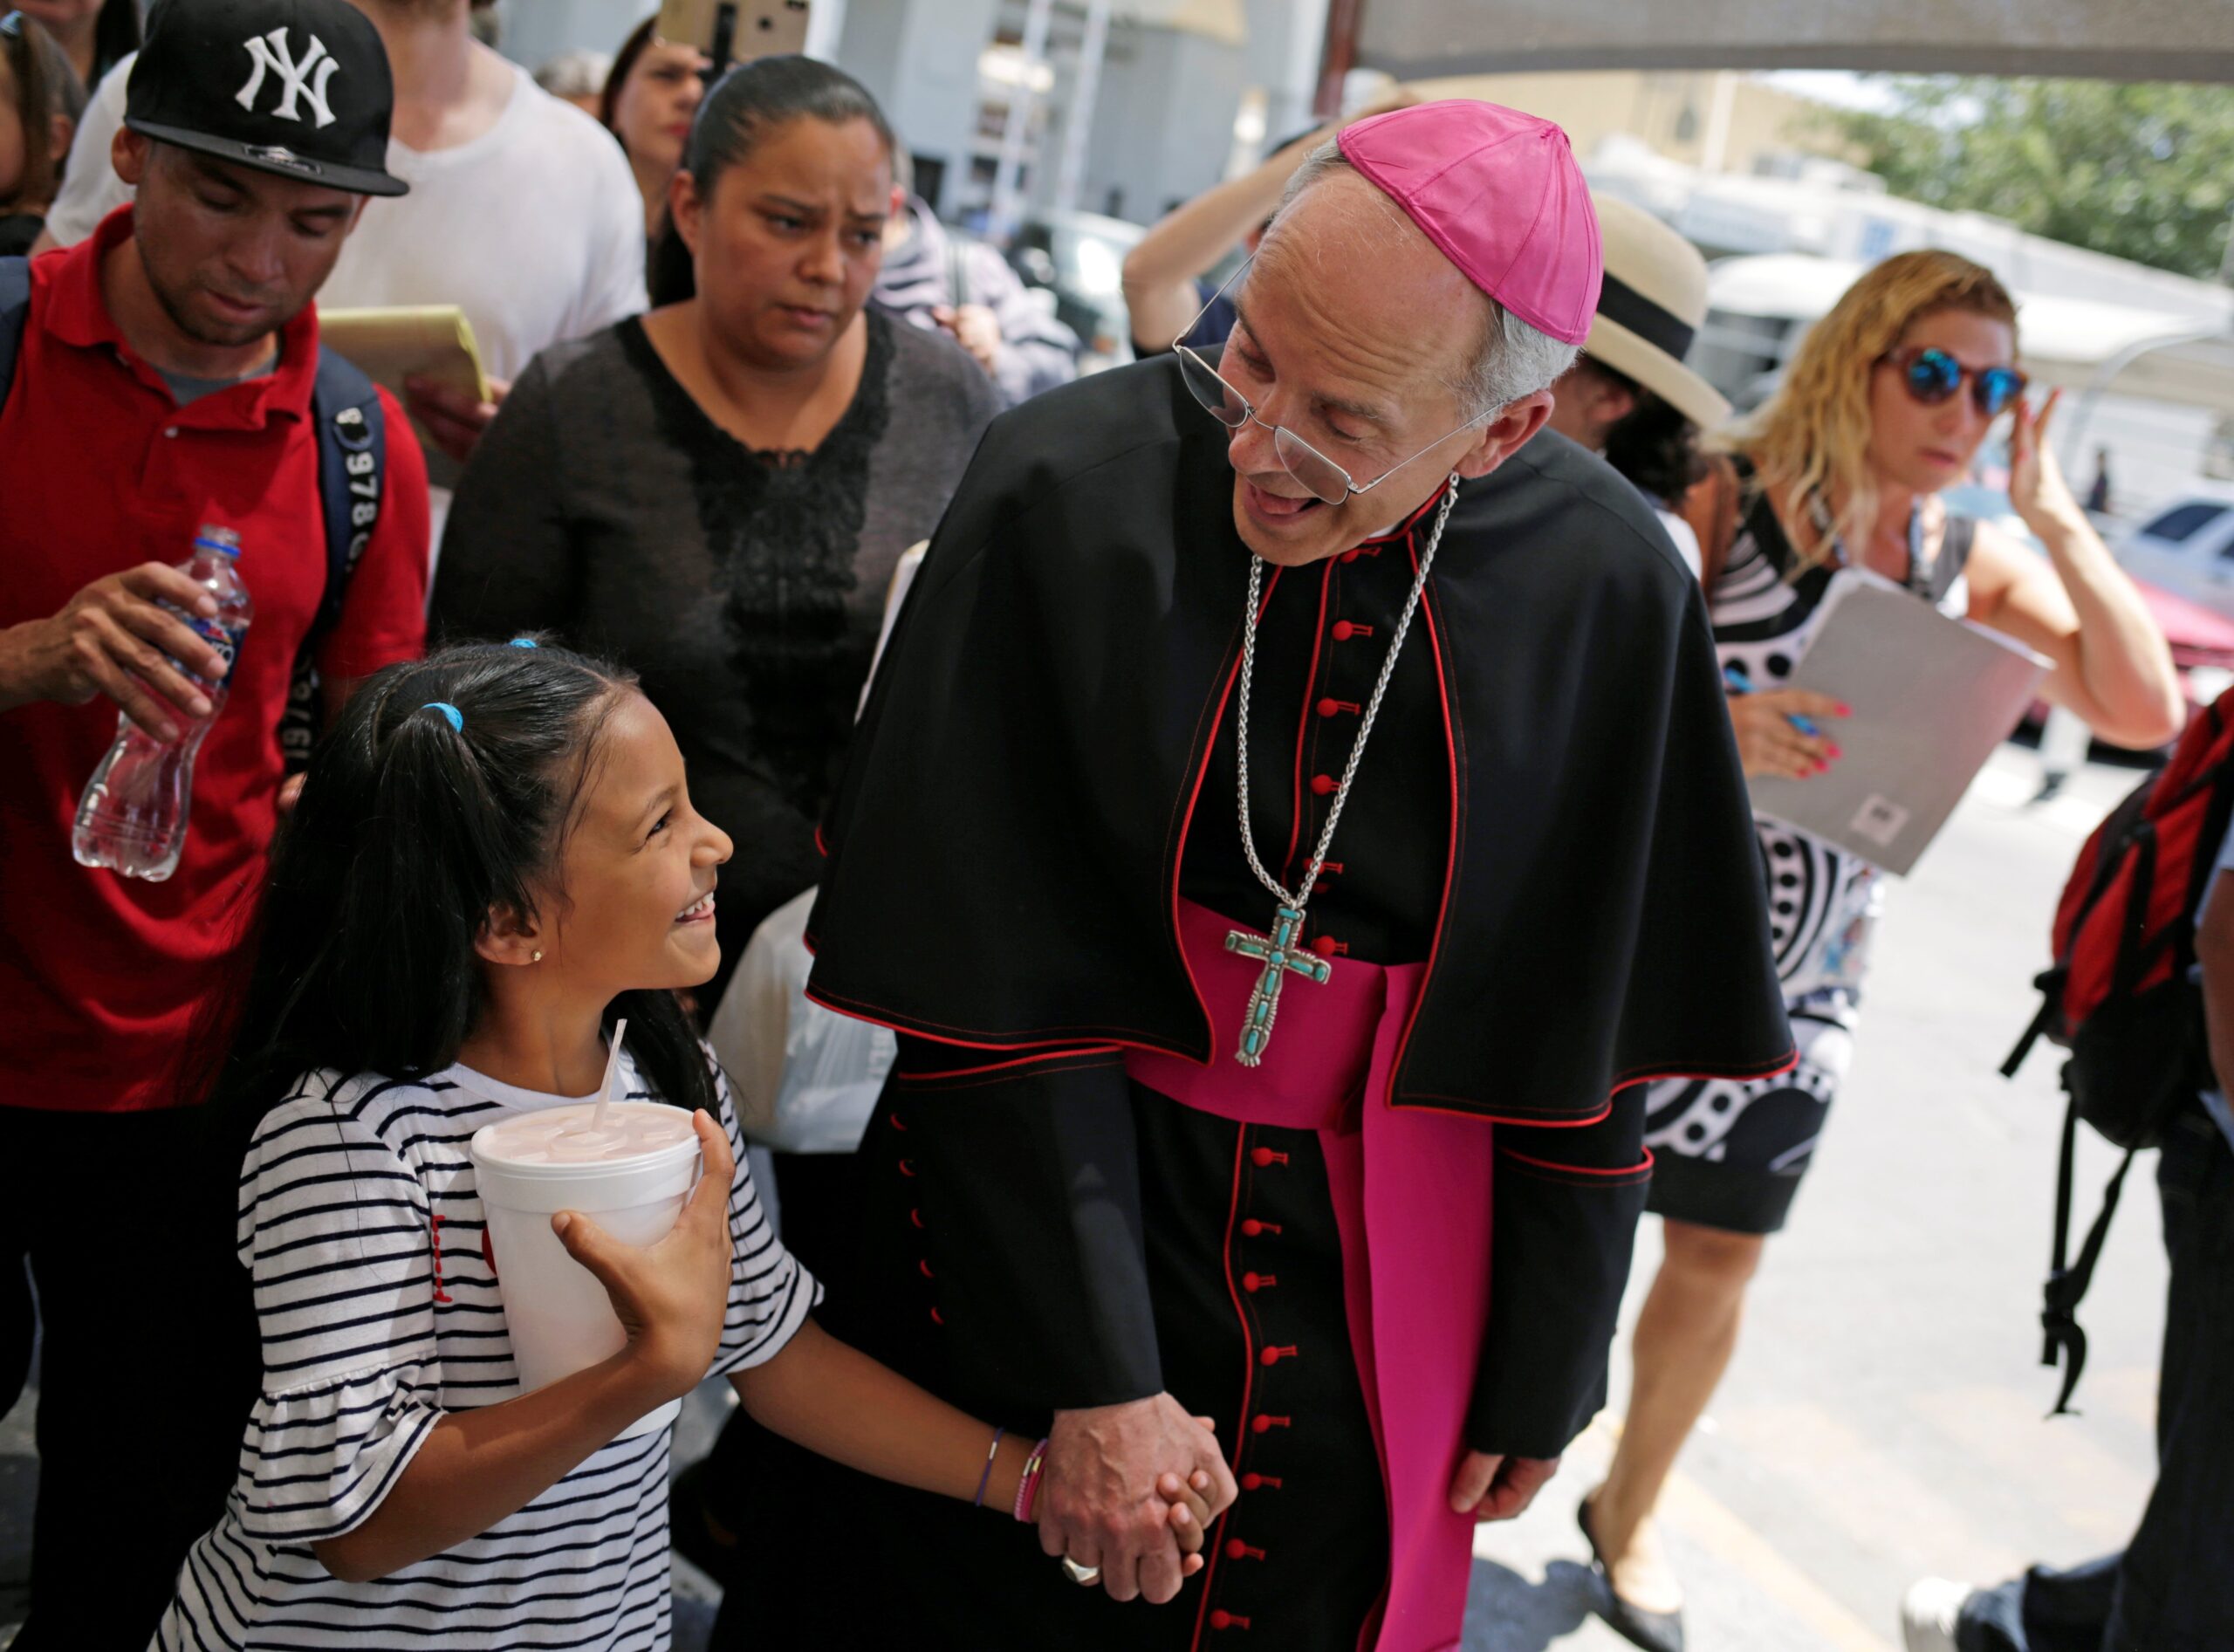 Bishop Mark J. Seitz of El Paso, Texas, shares a smile with a Honduran girl named Cesia as he walks and prays with a group of migrants at the Lerdo International Bridge in El Paso June 27, 2019. (OSV News photo/Jose Luis Gonzalez, Reuters)